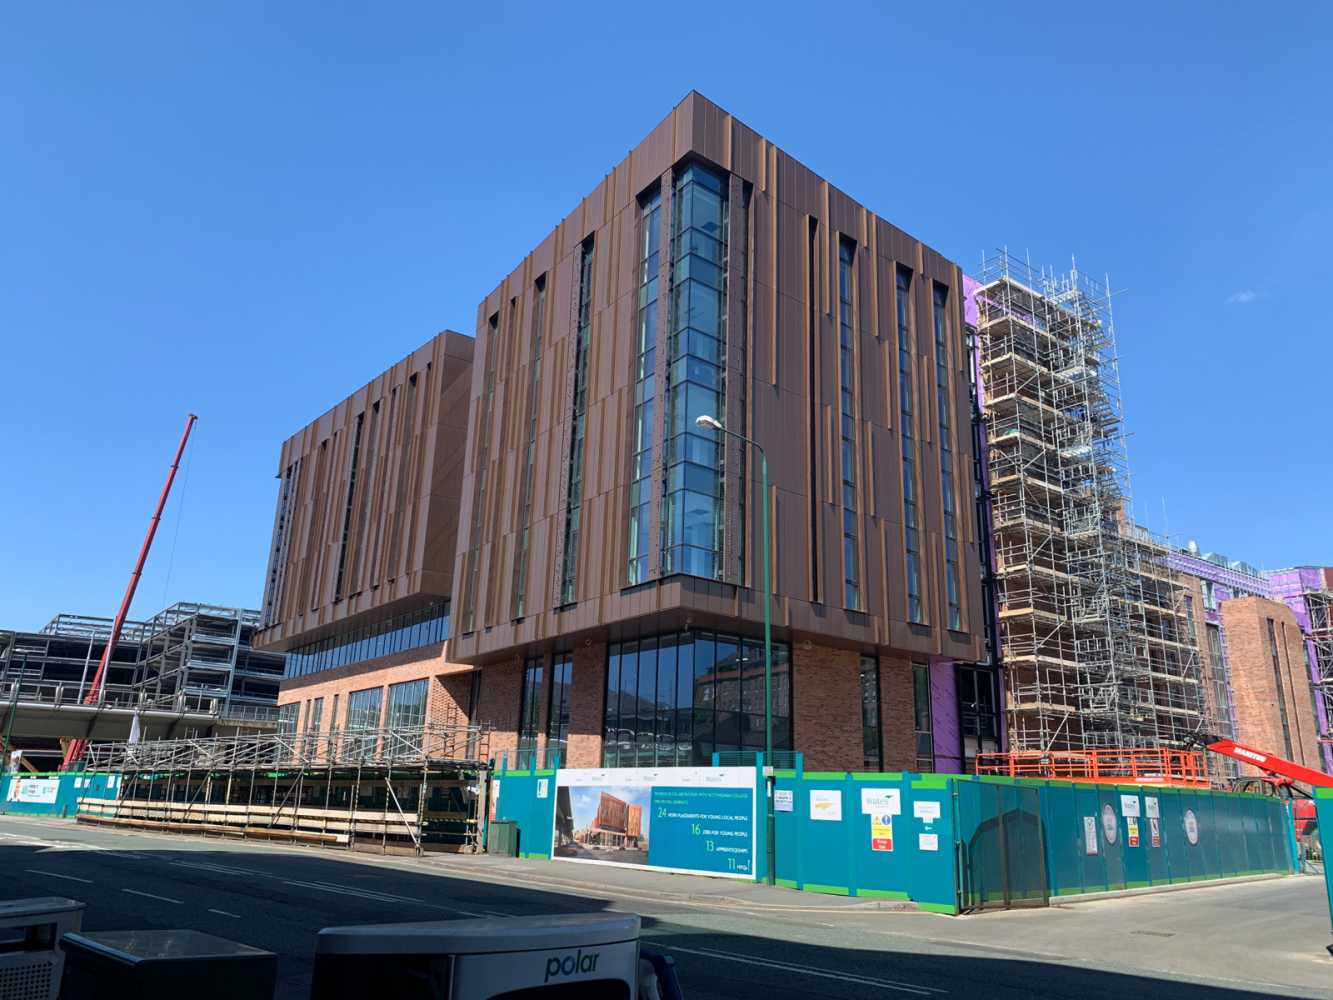 Nottingham College City Hub, currently under construction